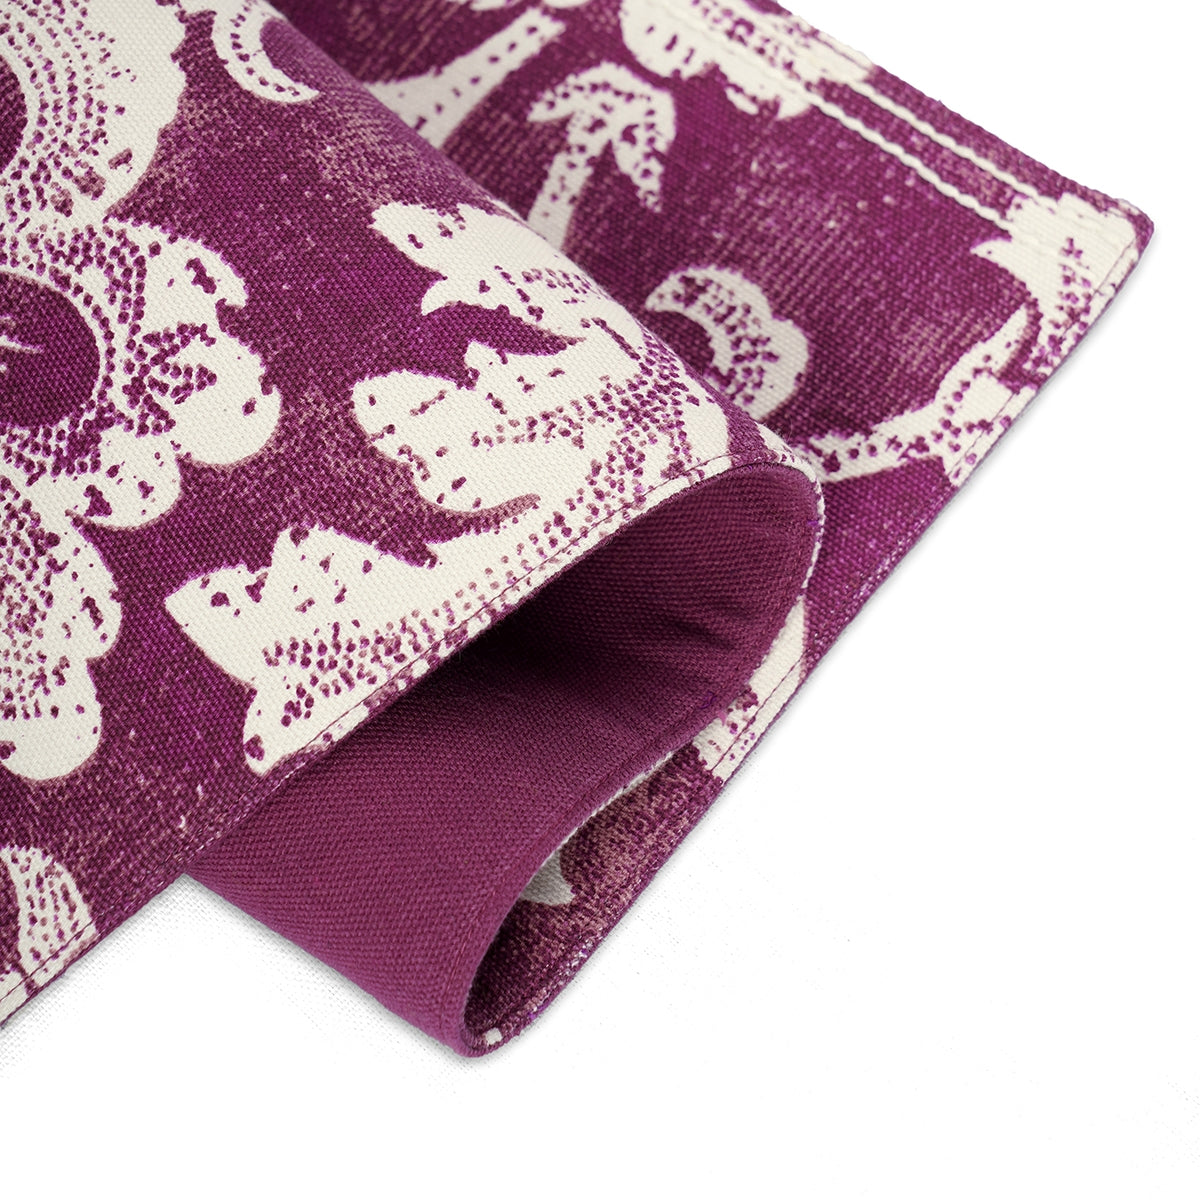 Maroon/Plum cotton Placemat with bold floral block print , 13X19 inches